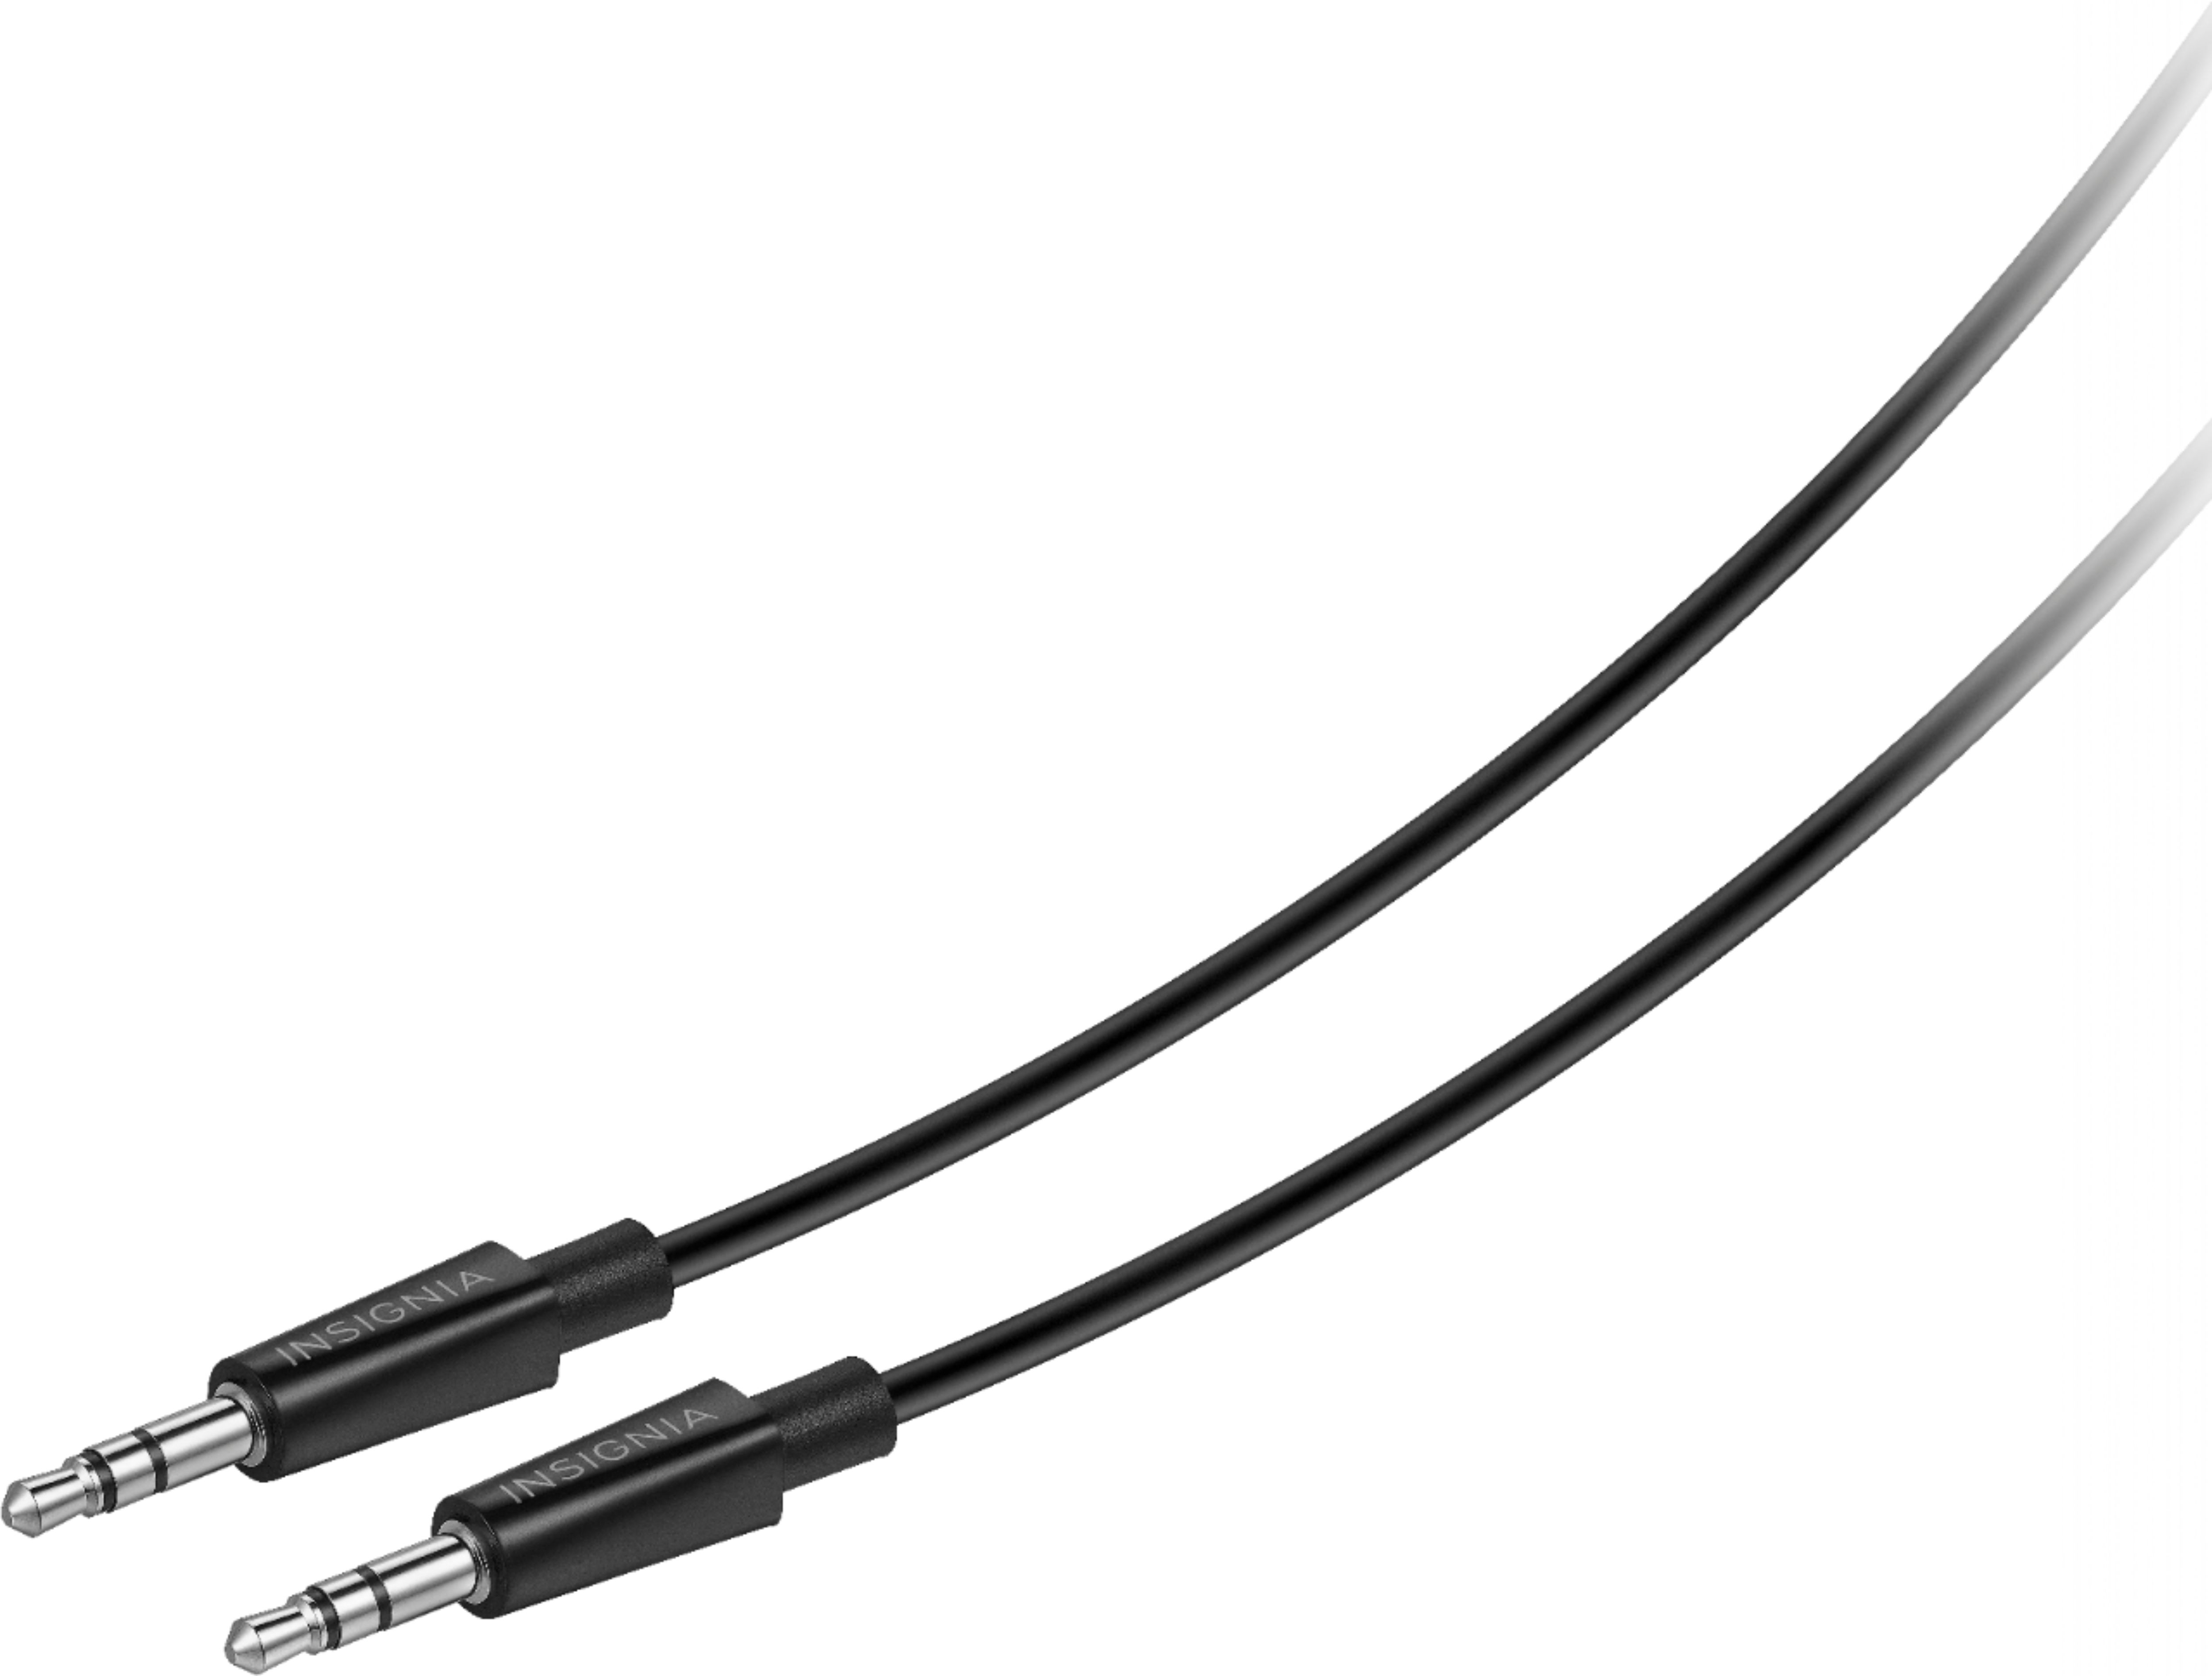 10 ft Slim 3.5mm Stereo Audio Cable - M/M